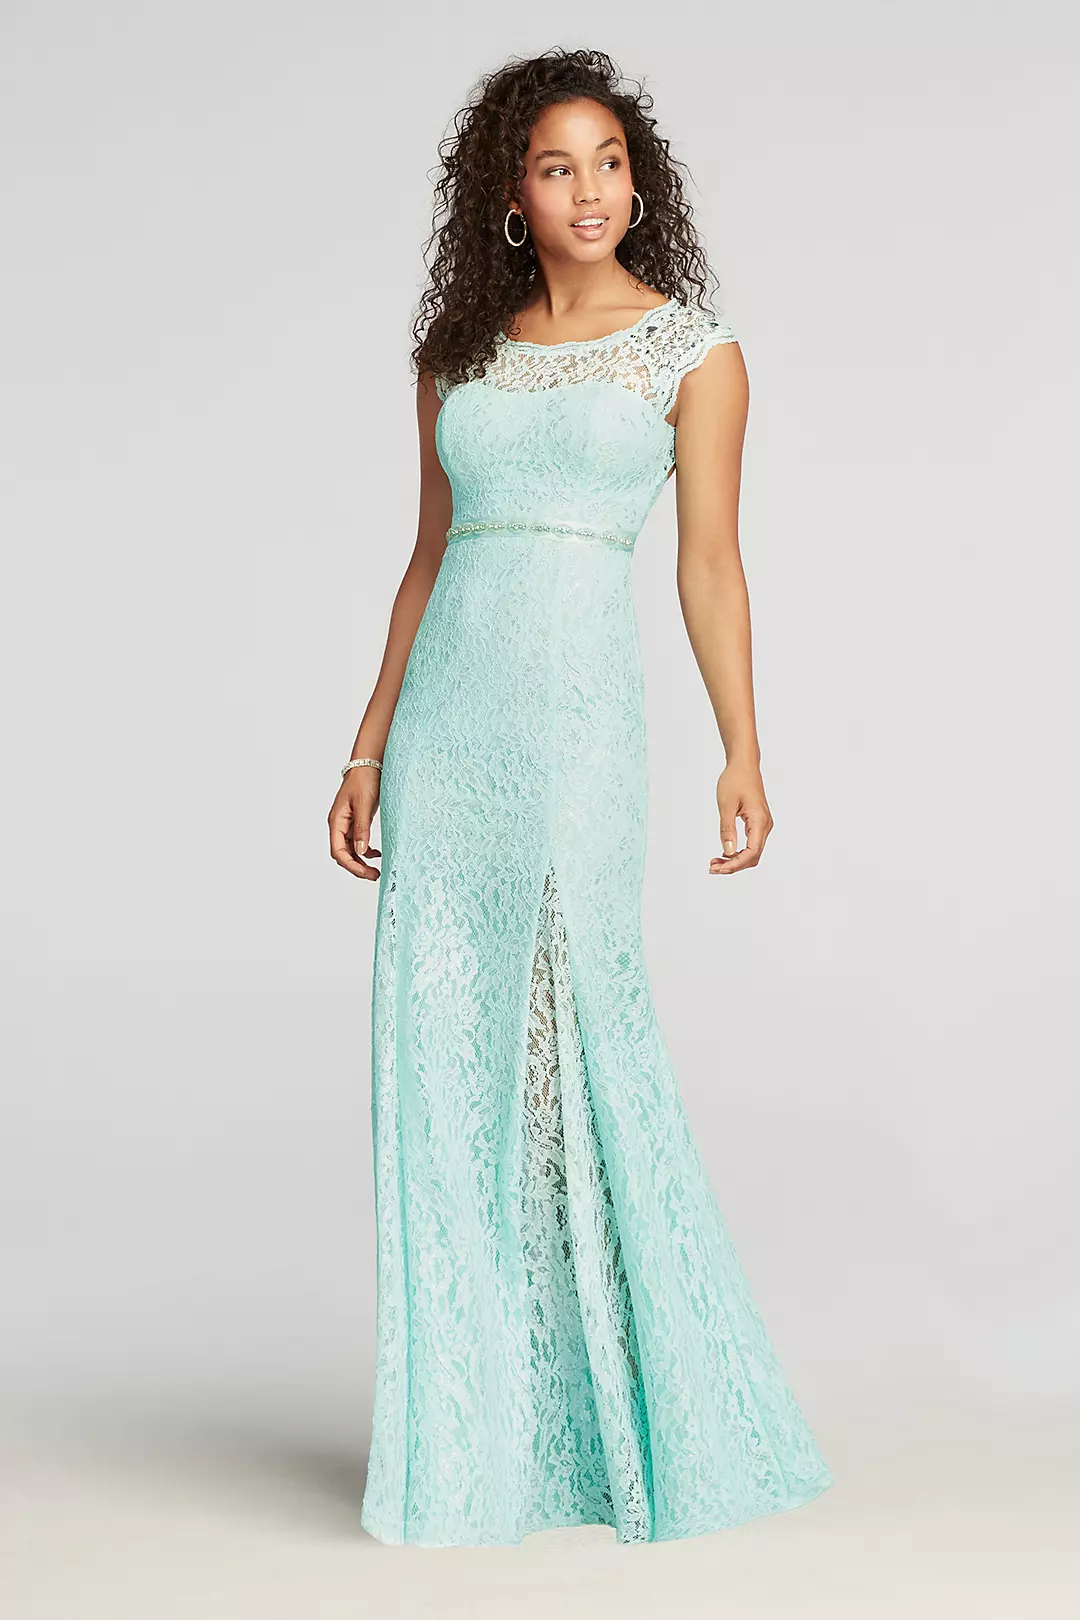 Lace Cap Sleeve Prom Dress with Beaded Waist Image